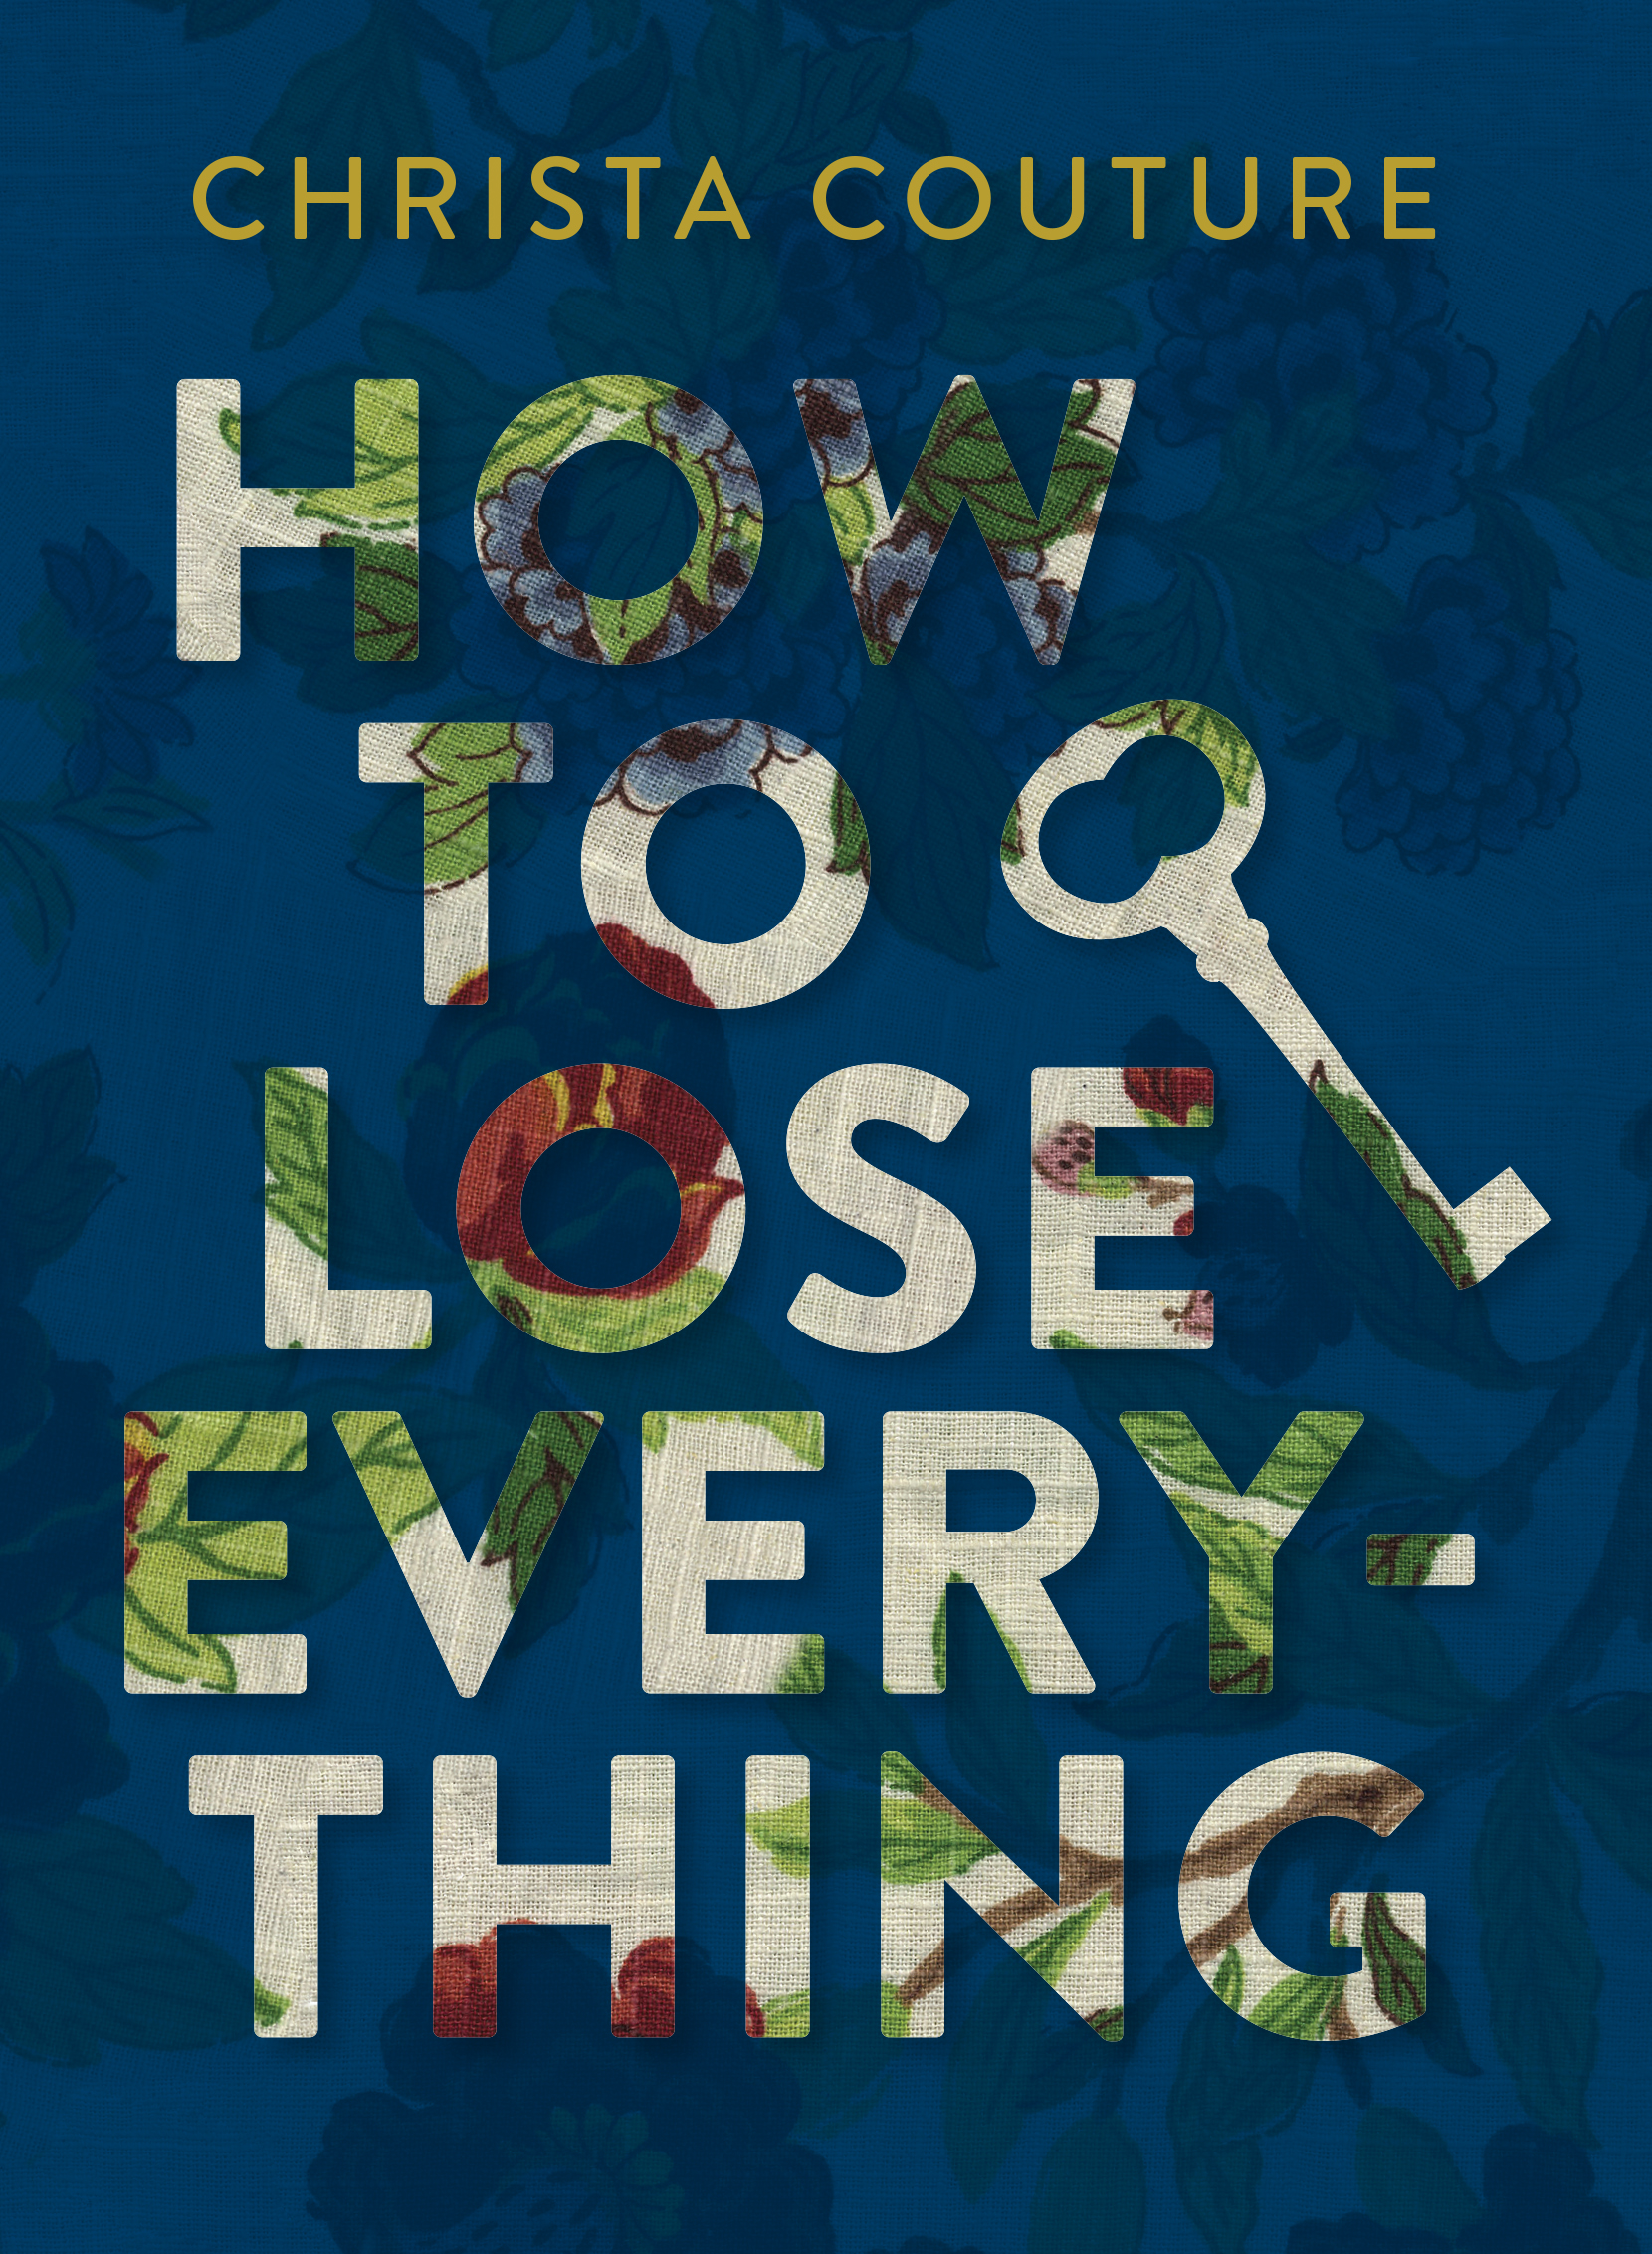 Couture, Christa - How To Lose Everything - BookCover